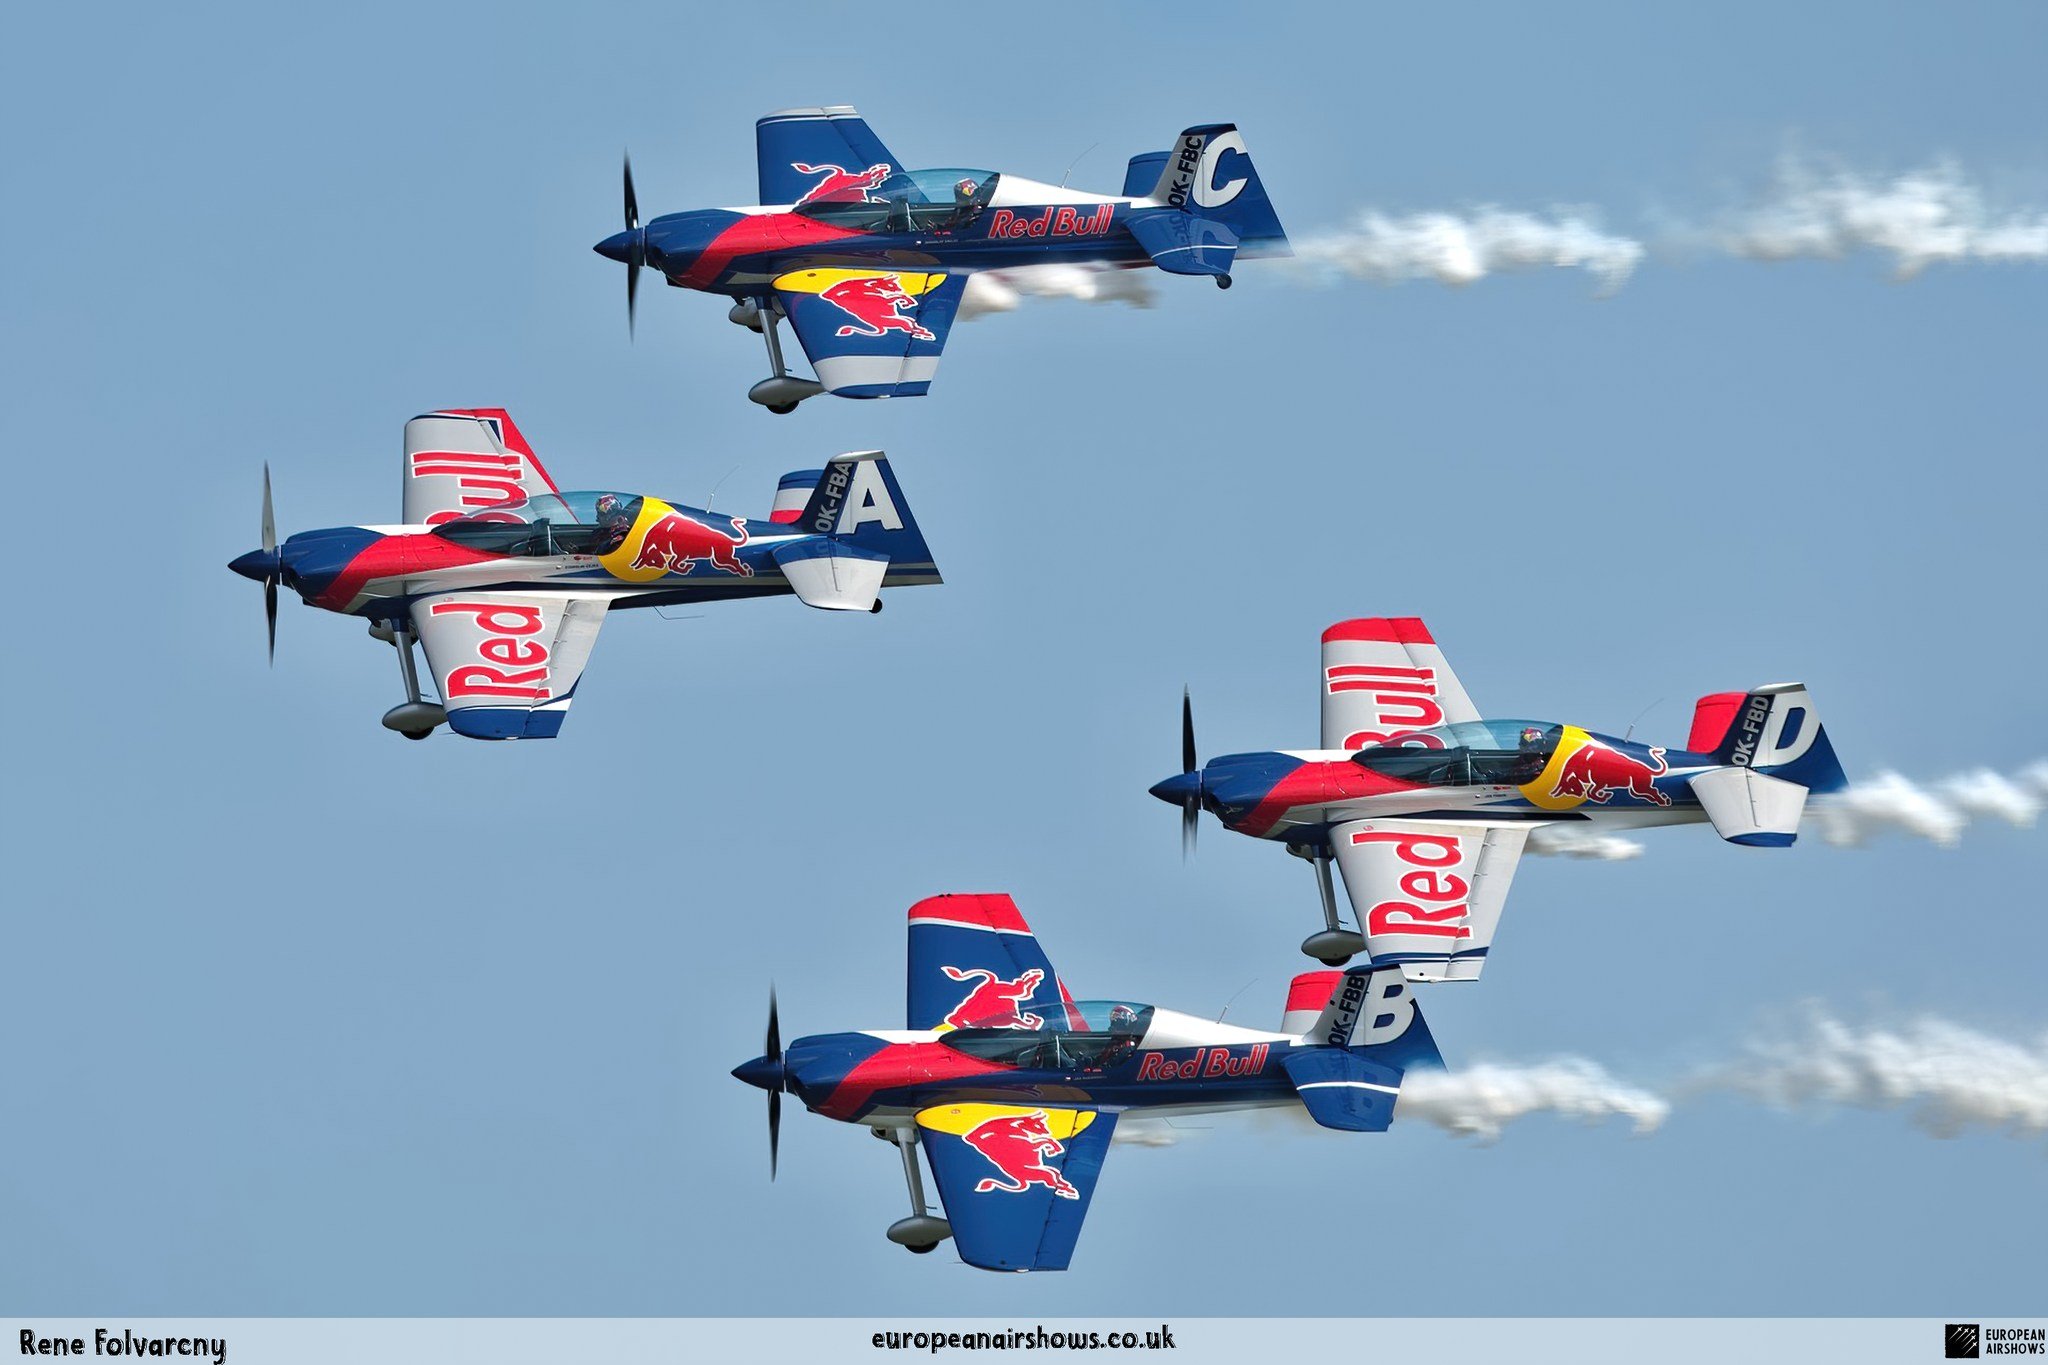 𝐀𝐈𝐑𝐒𝐇𝐎𝐖 𝐍𝐄𝐖𝐒: The Flying Bulls Aerobatic Team have released their 2024 schedule. The team will perform at 15 events in 6 different countries this season.

Find out where you can see the team by clicking the link below.

https://www.europea